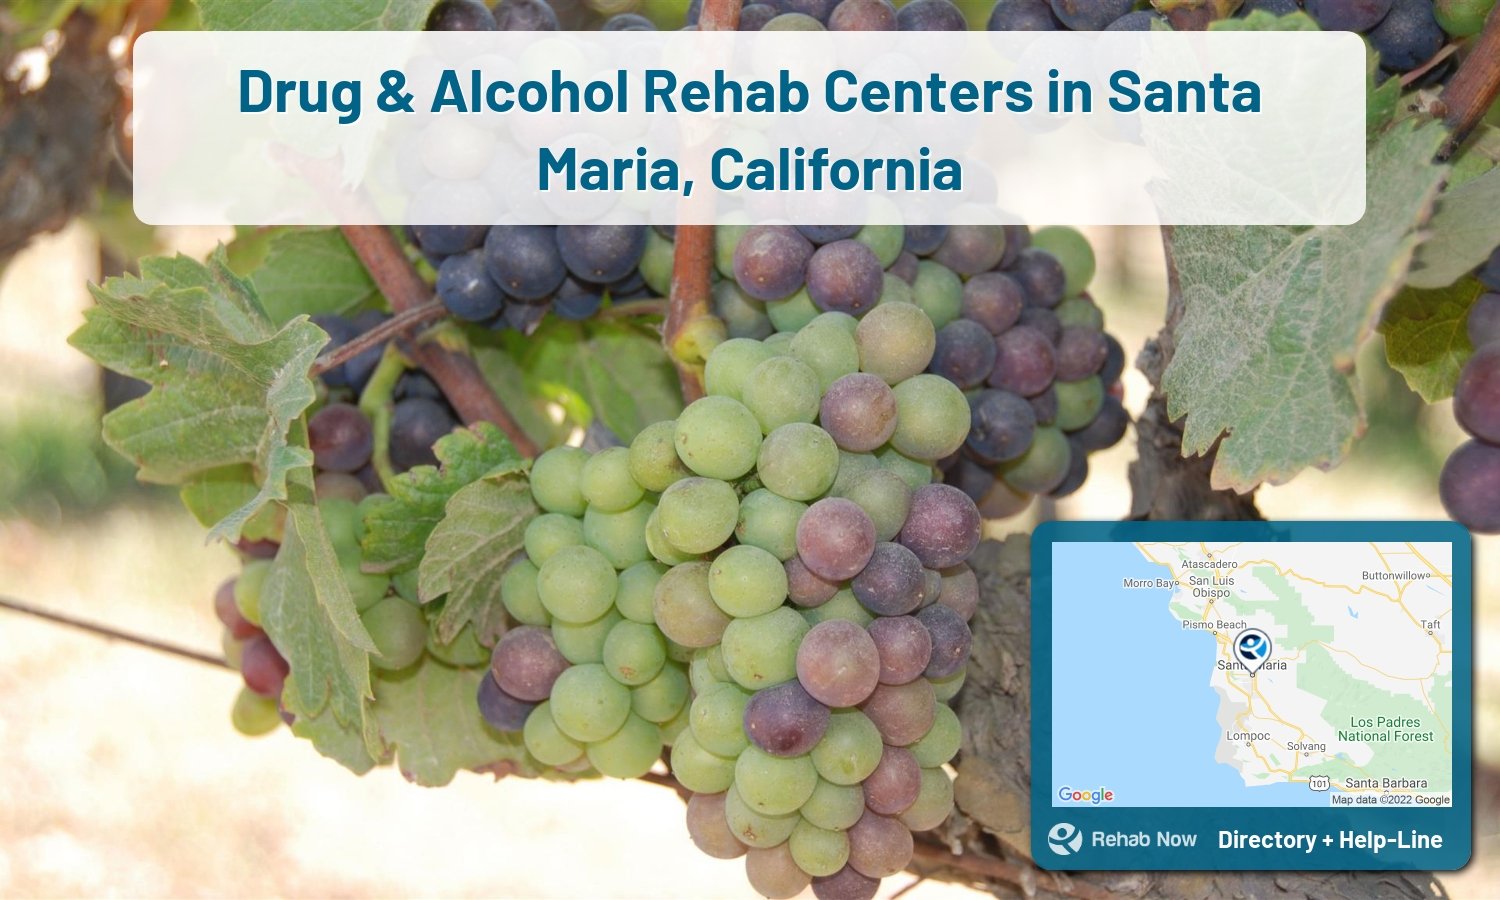 View options, availability, treatment methods, and more, for drug rehab and alcohol treatment in Santa Maria, California